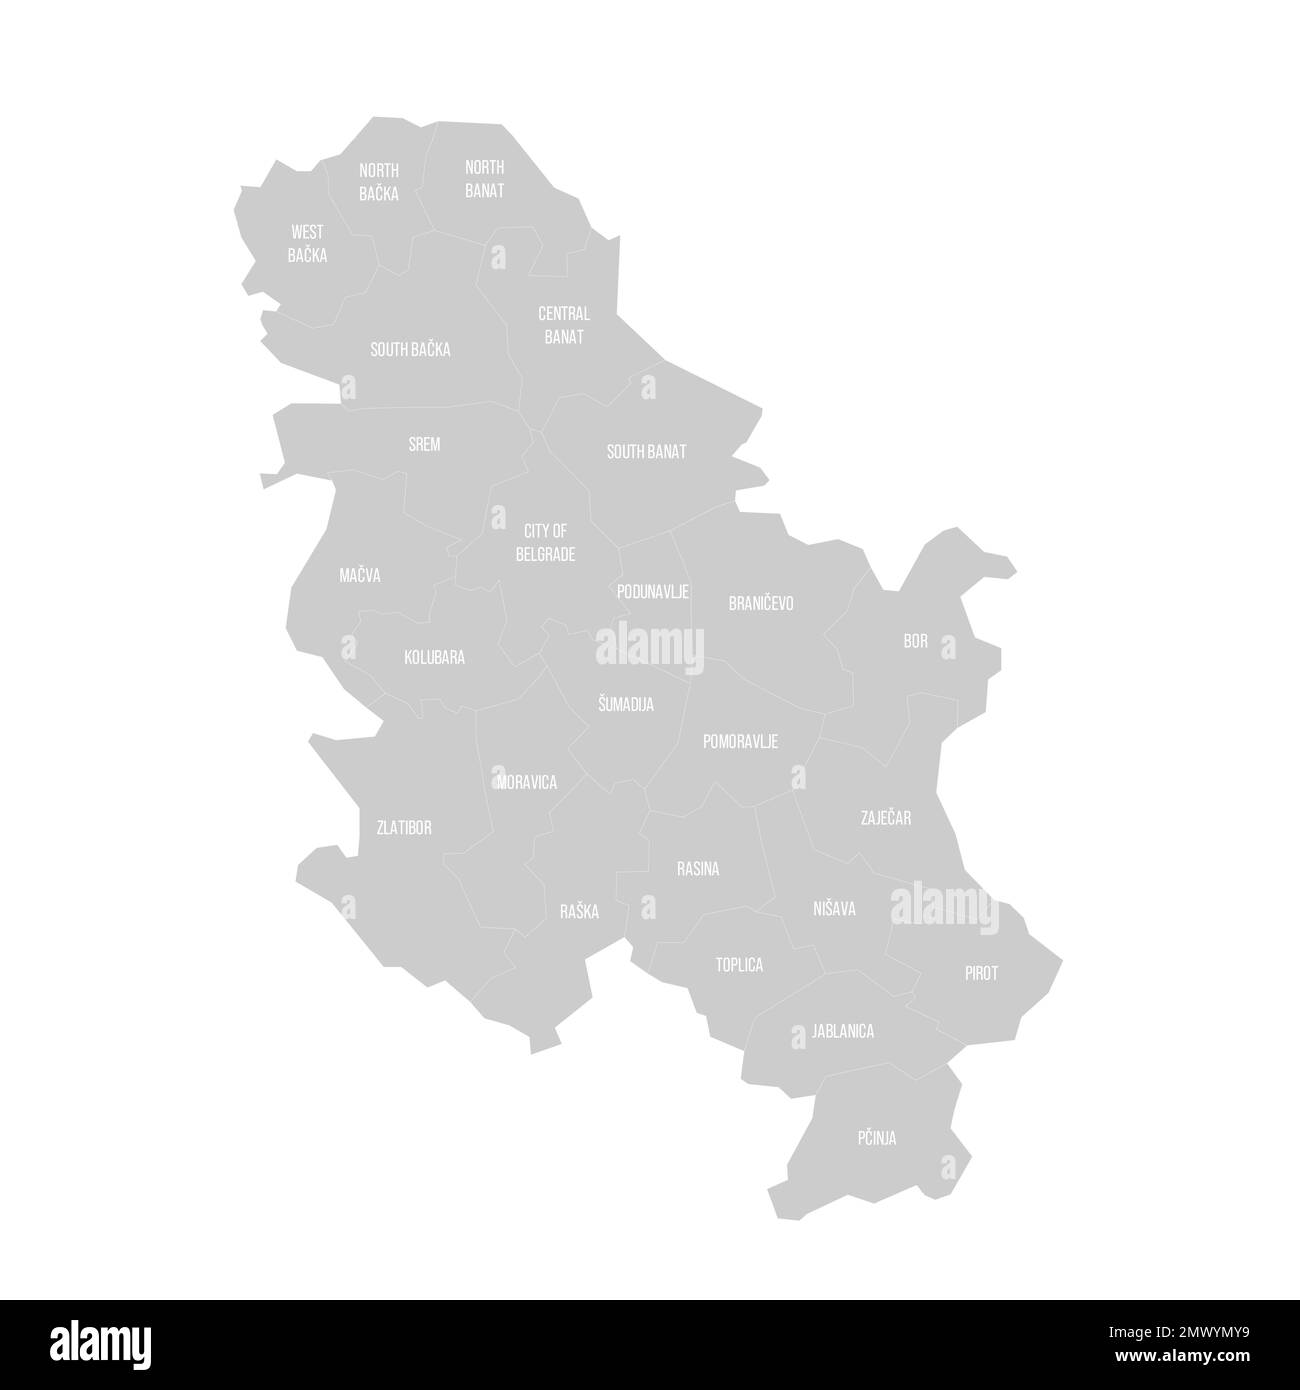 Serbia political map of administrative divisions - okrugs and autonomous city of Belgrade. Solid light gray map with white line borders and labels. Stock Vector